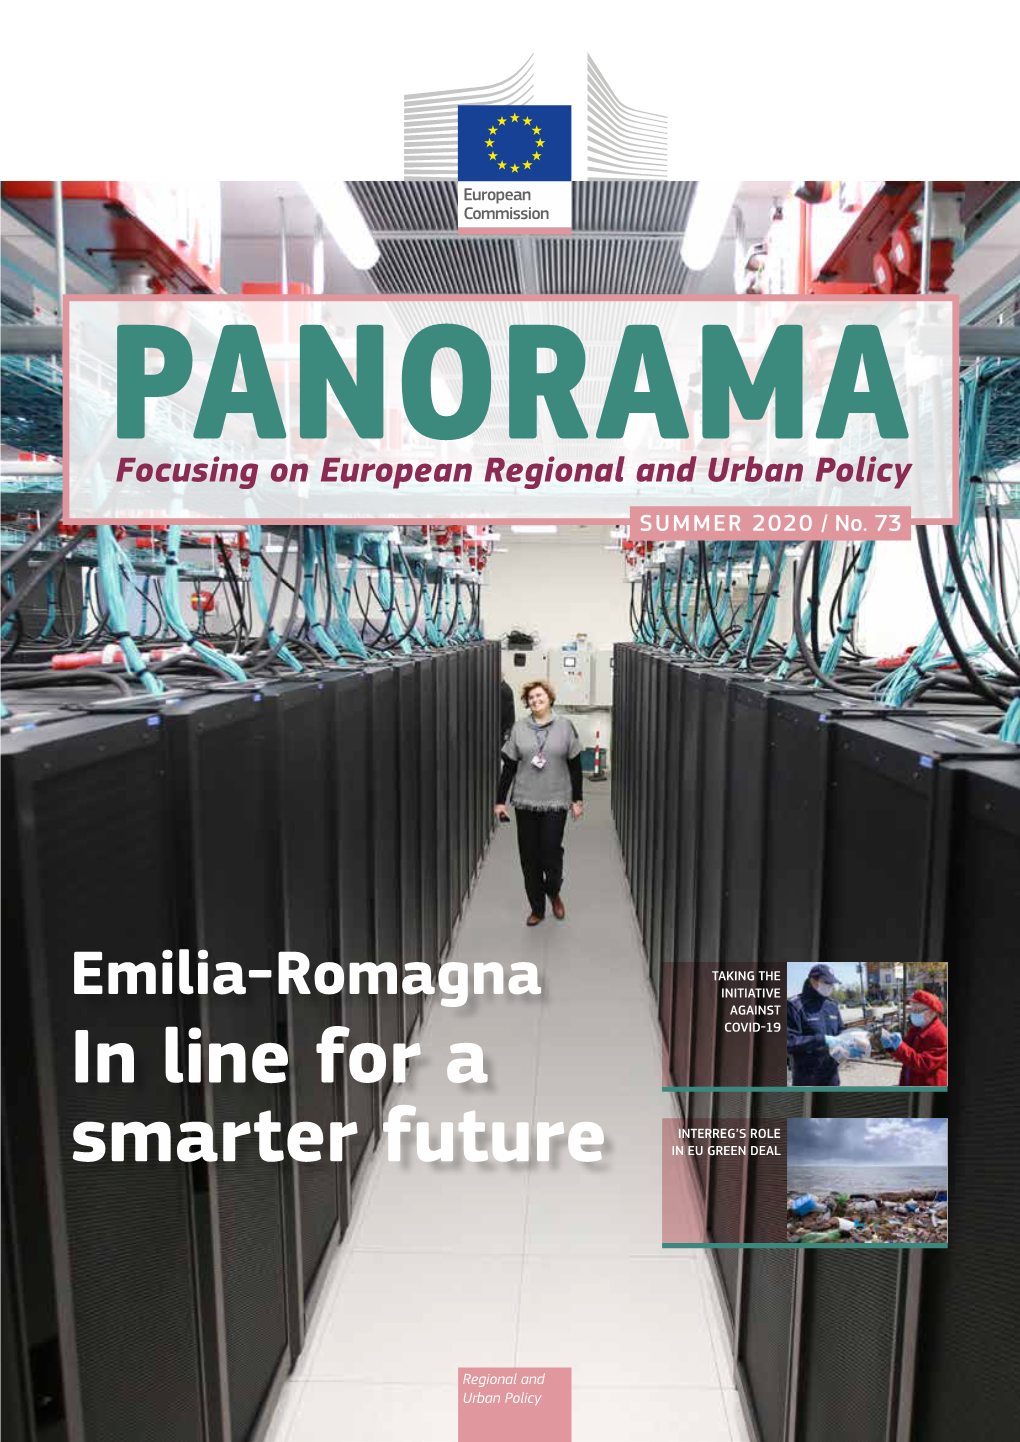 Panorama Magazine As We Move Towards Consistently Argued That Solidarity and Convergence Should a Fully Digital Publication